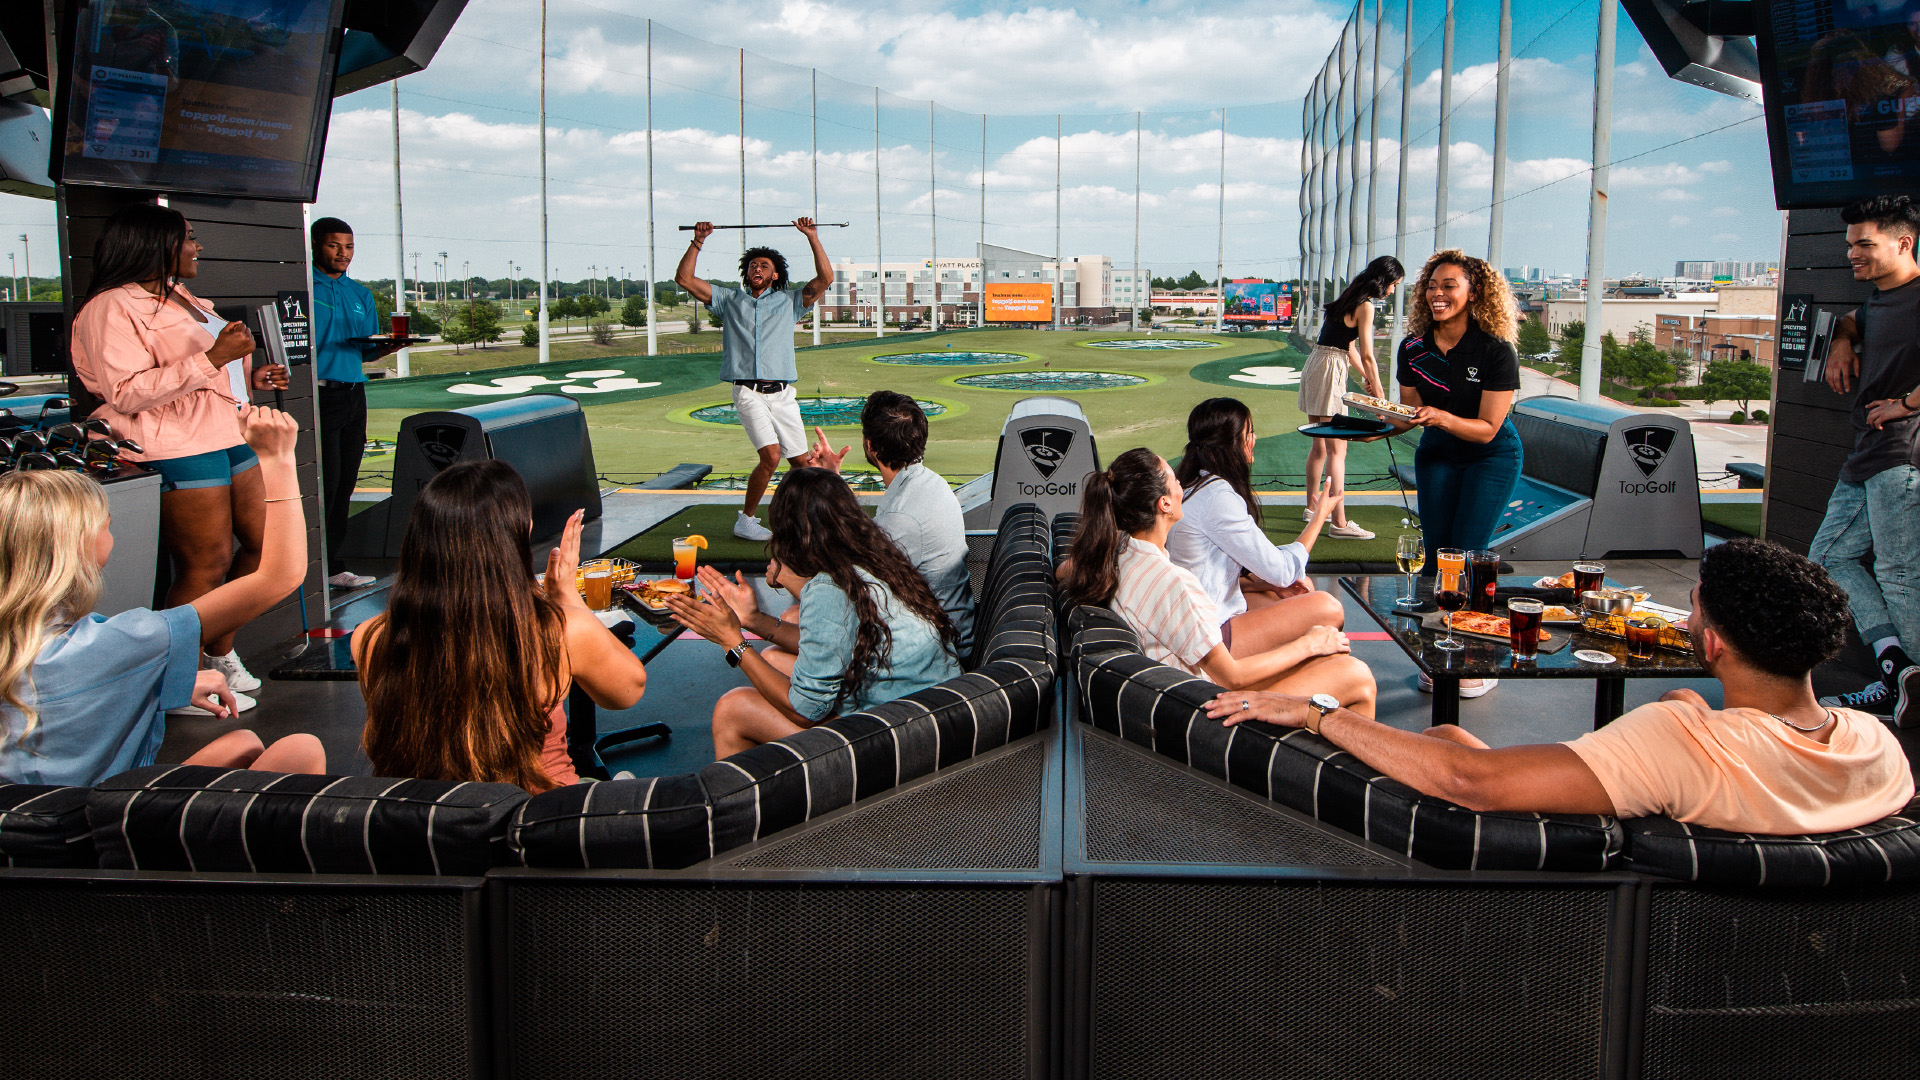 multiple Guests enjoying 2 bays at Topgolf